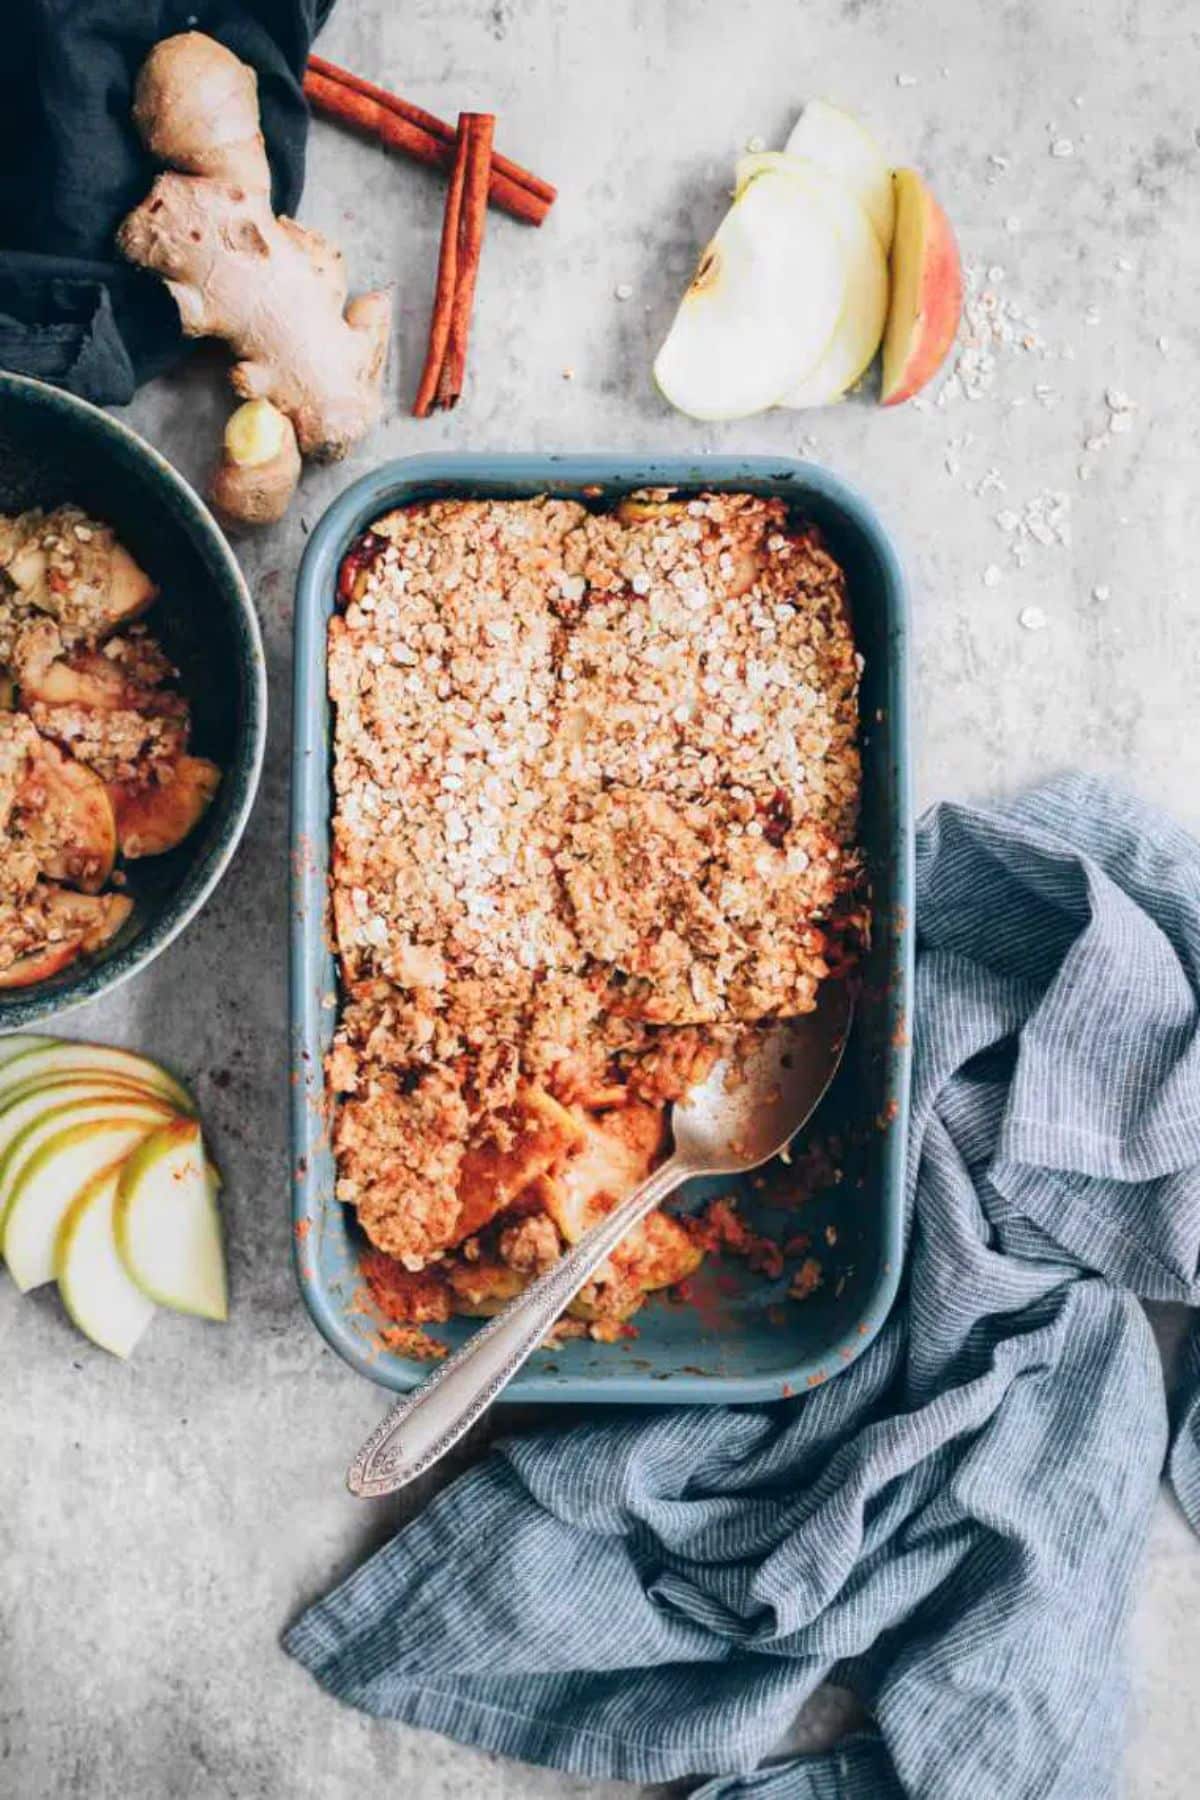 Vegan Sugar-Free Apple Crumble in a blue casserole with a spoon.